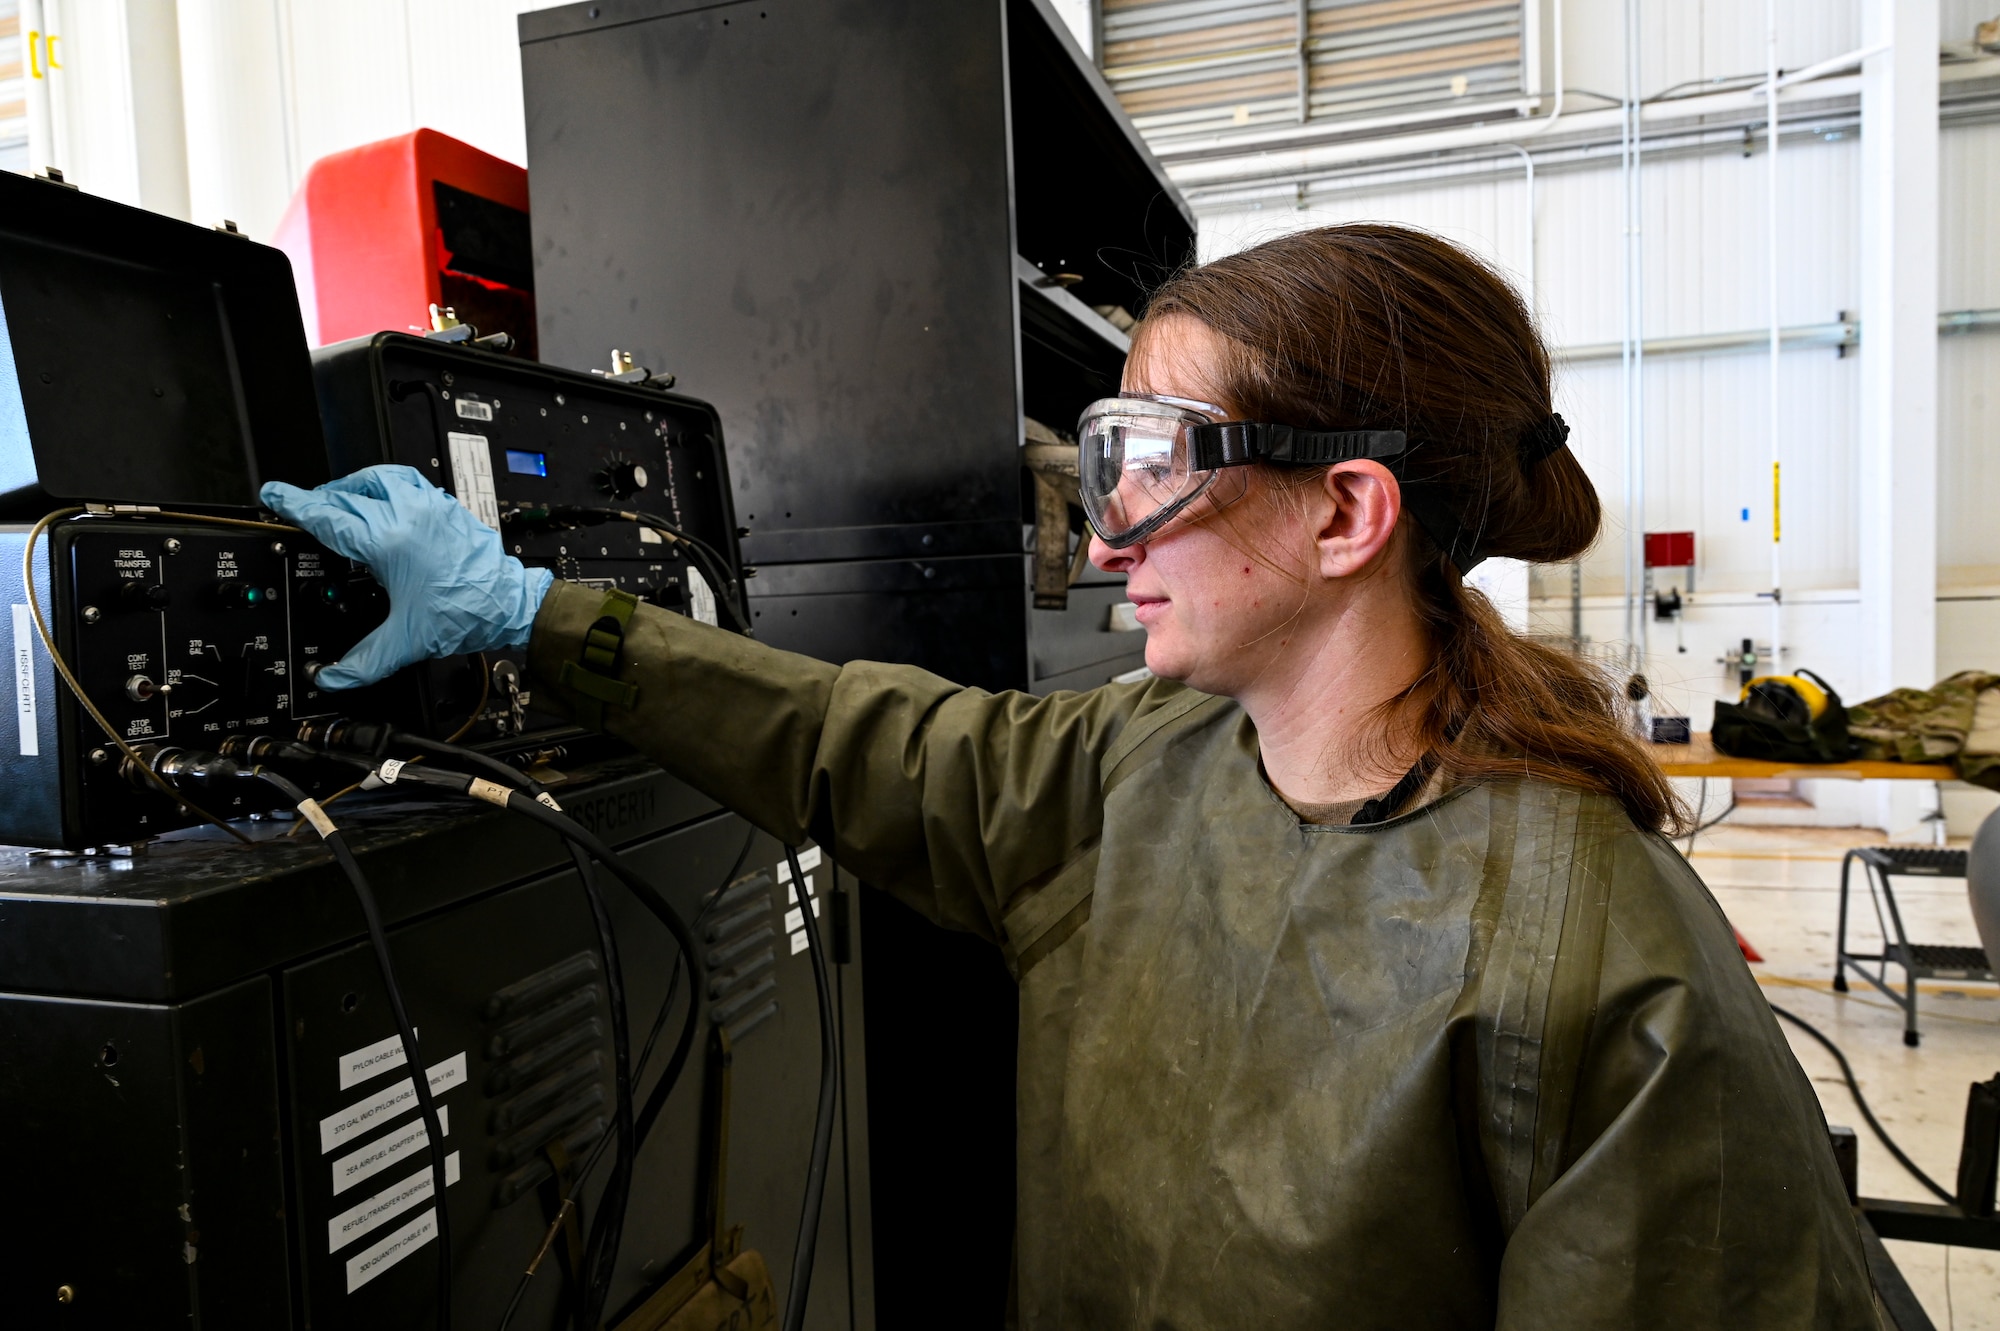 U.S. Air Force Staff Sgt. Thelma Bradshaw, 49th Component Maintenance Squadron fuels craftsman, checks fuel levels of an F-16 Viper Holloman Air Force Base, New Mexico, Feb. 8, 2023. The 49th CMS fuels shop supplies fuel to approximately 100 F-16 Vipers on Holloman ensuring each one is mission-capable. (U.S. Air Force photo by Airman 1st Class Isaiah Pedrazzini)